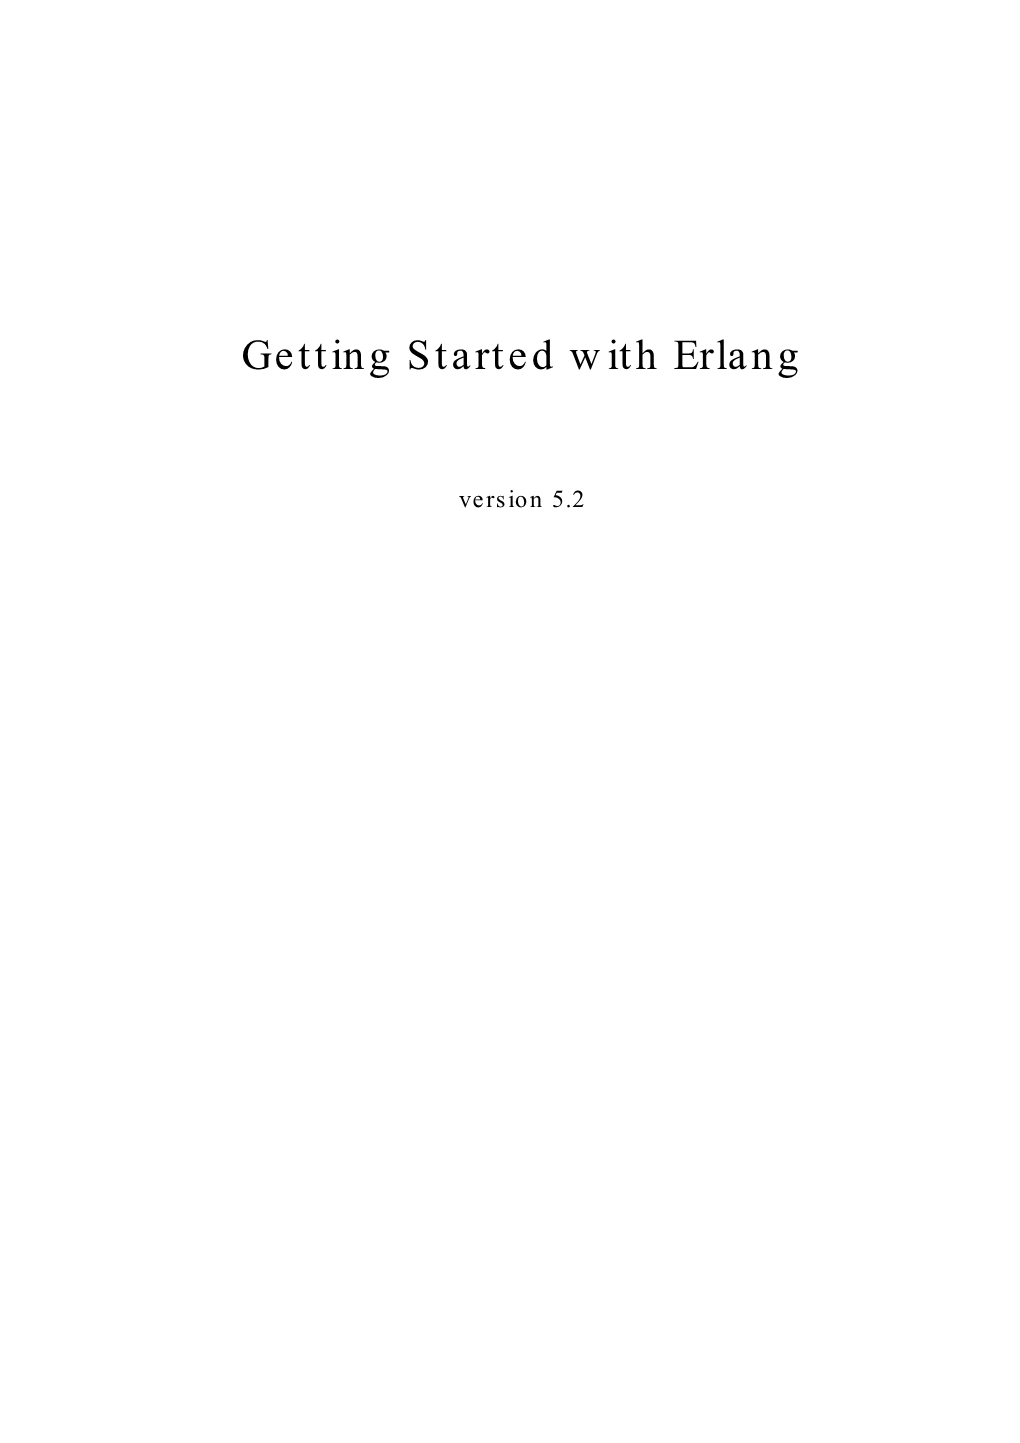 Getting Started with Erlang